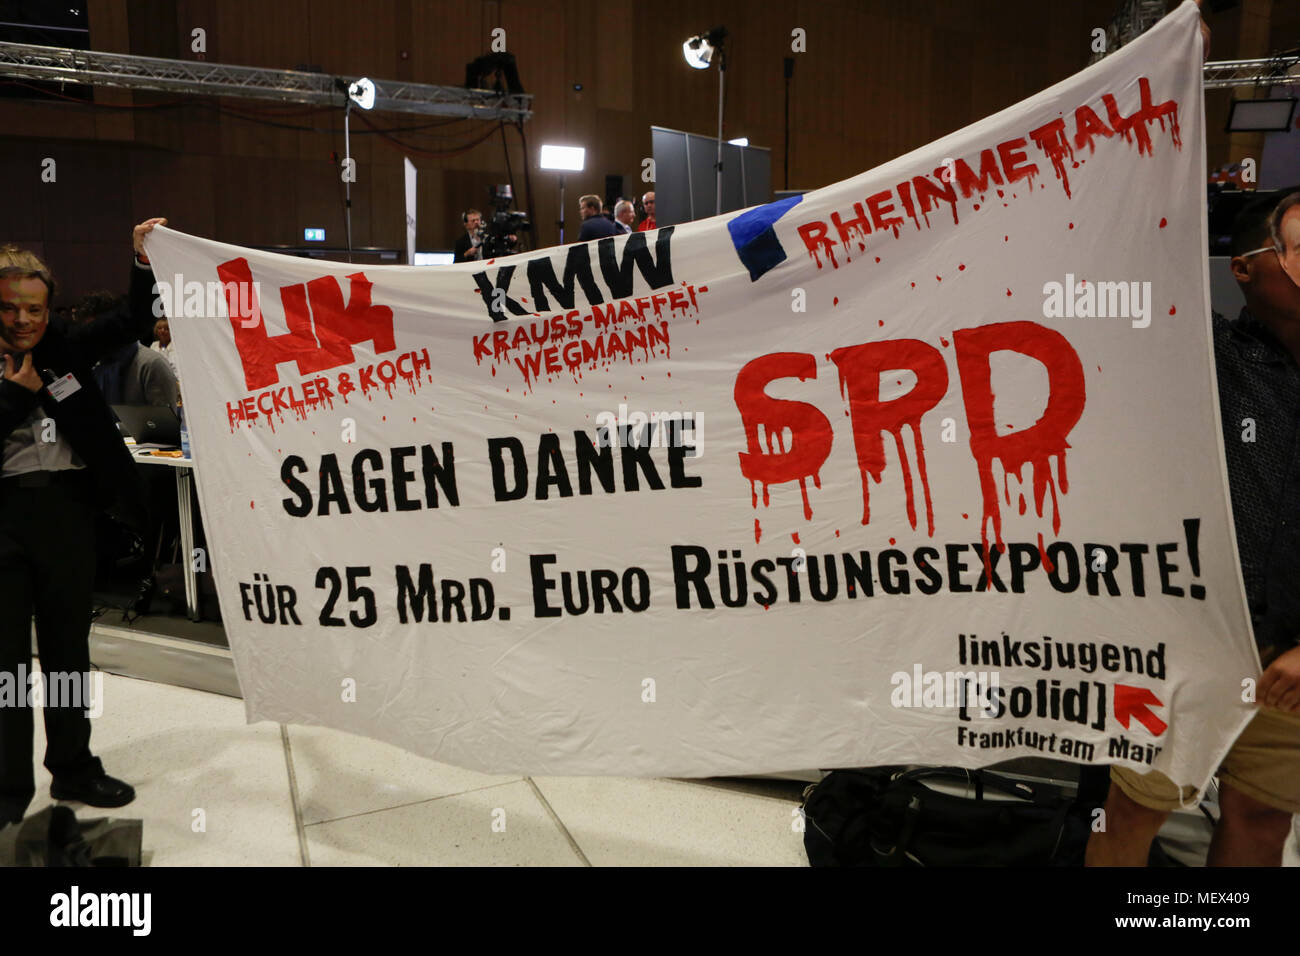 Wiesbaden, Germany. 22nd Apr, 2018. Members of the youth organisation of the party Die Linke (The Left) protest against weapons trade, in which they see the SPD as partial responsible. Andrea Nahles, the leader of the parliamentary party of the SPD in the Bundestag (German Parliament) has been elected as the new chairwoman of the SPD (Social Democratic Party of Germany). She won with 66% against her opponent Simone Lange in a contested election. She is the first women to lead the party in its 150 year long history. Credit: Michael Debets/Pacific Press/Alamy Live News Stock Photo